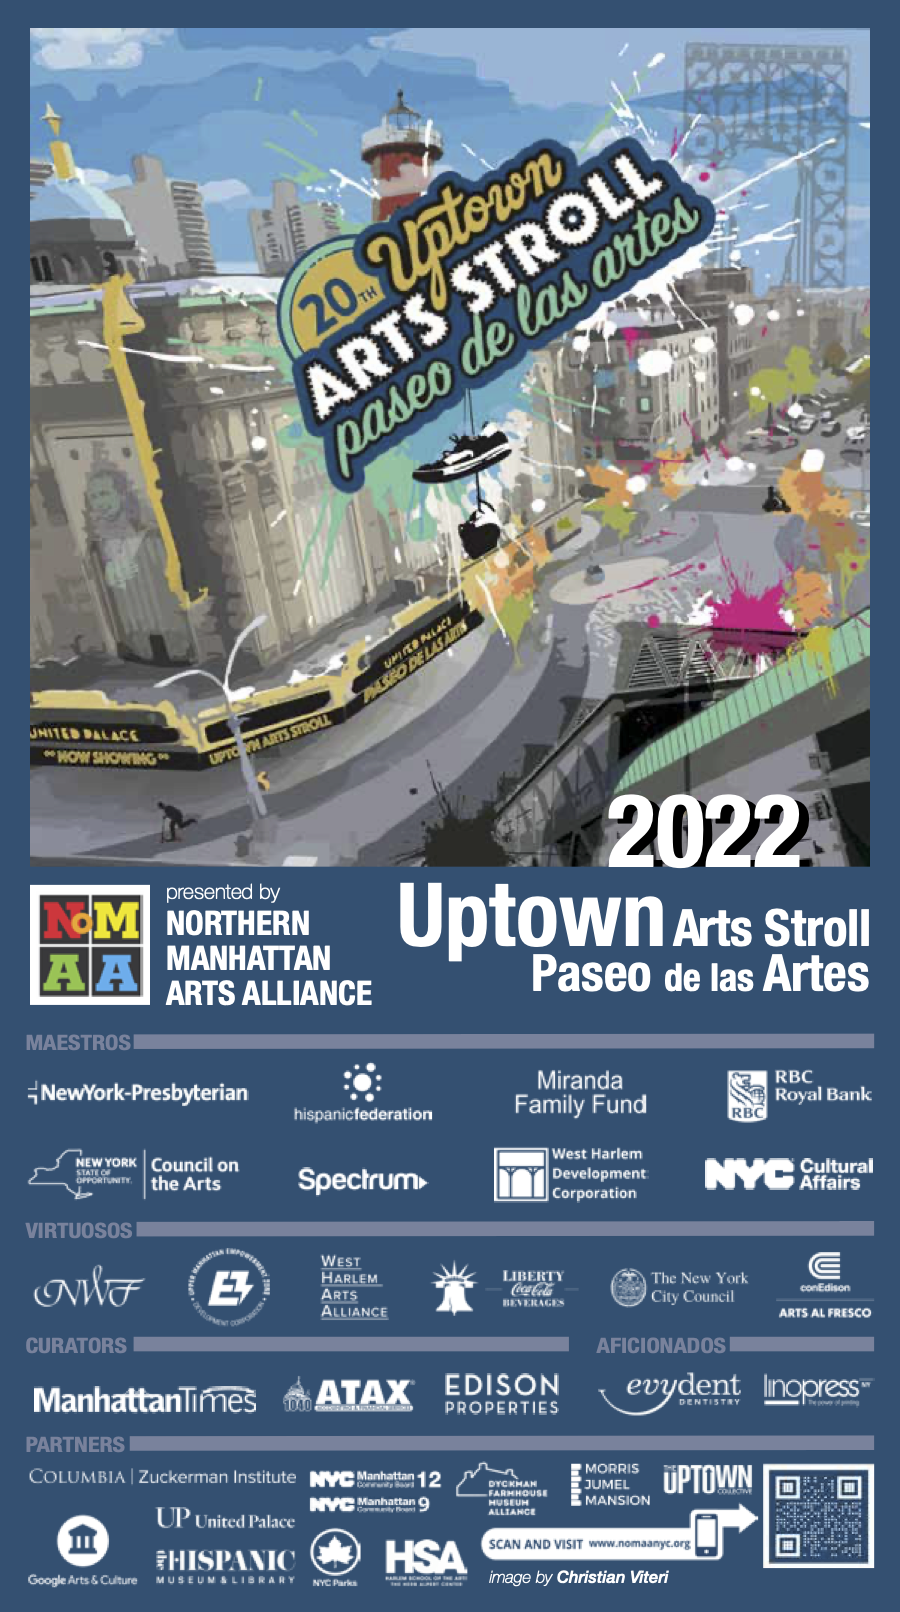 View the 2022 Uptown Arts Stroll guide